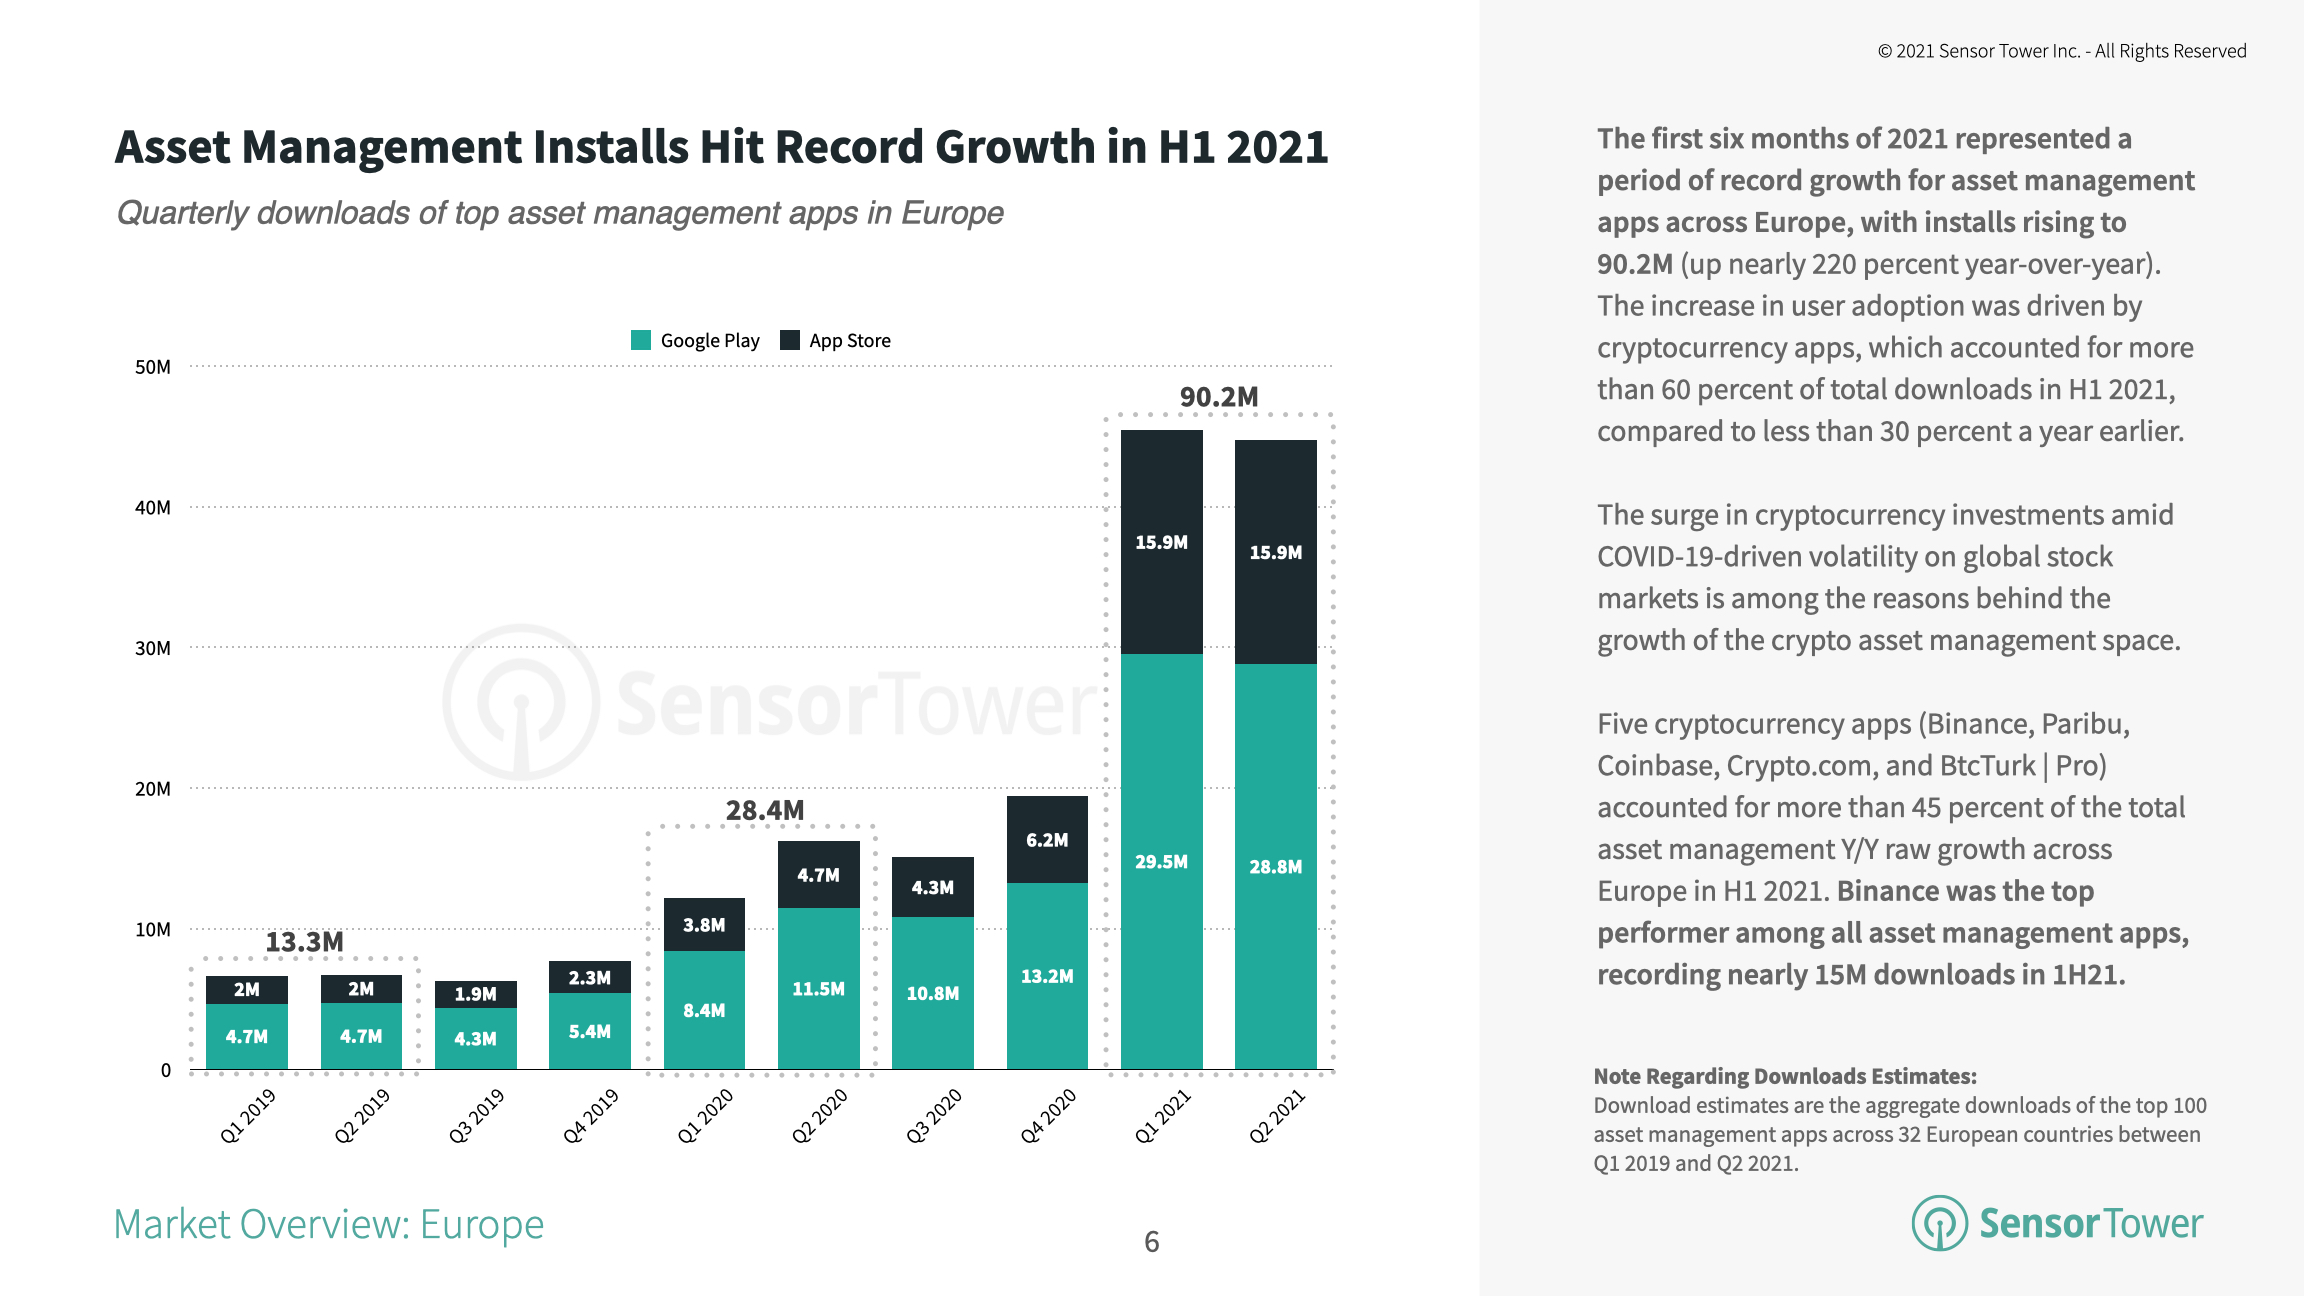 Mysterium genstand Rejsebureau Sensor Tower's State of Asset Management Apps in Europe 2021 Report:  Installs Triple Year-Over-Year in the First Half